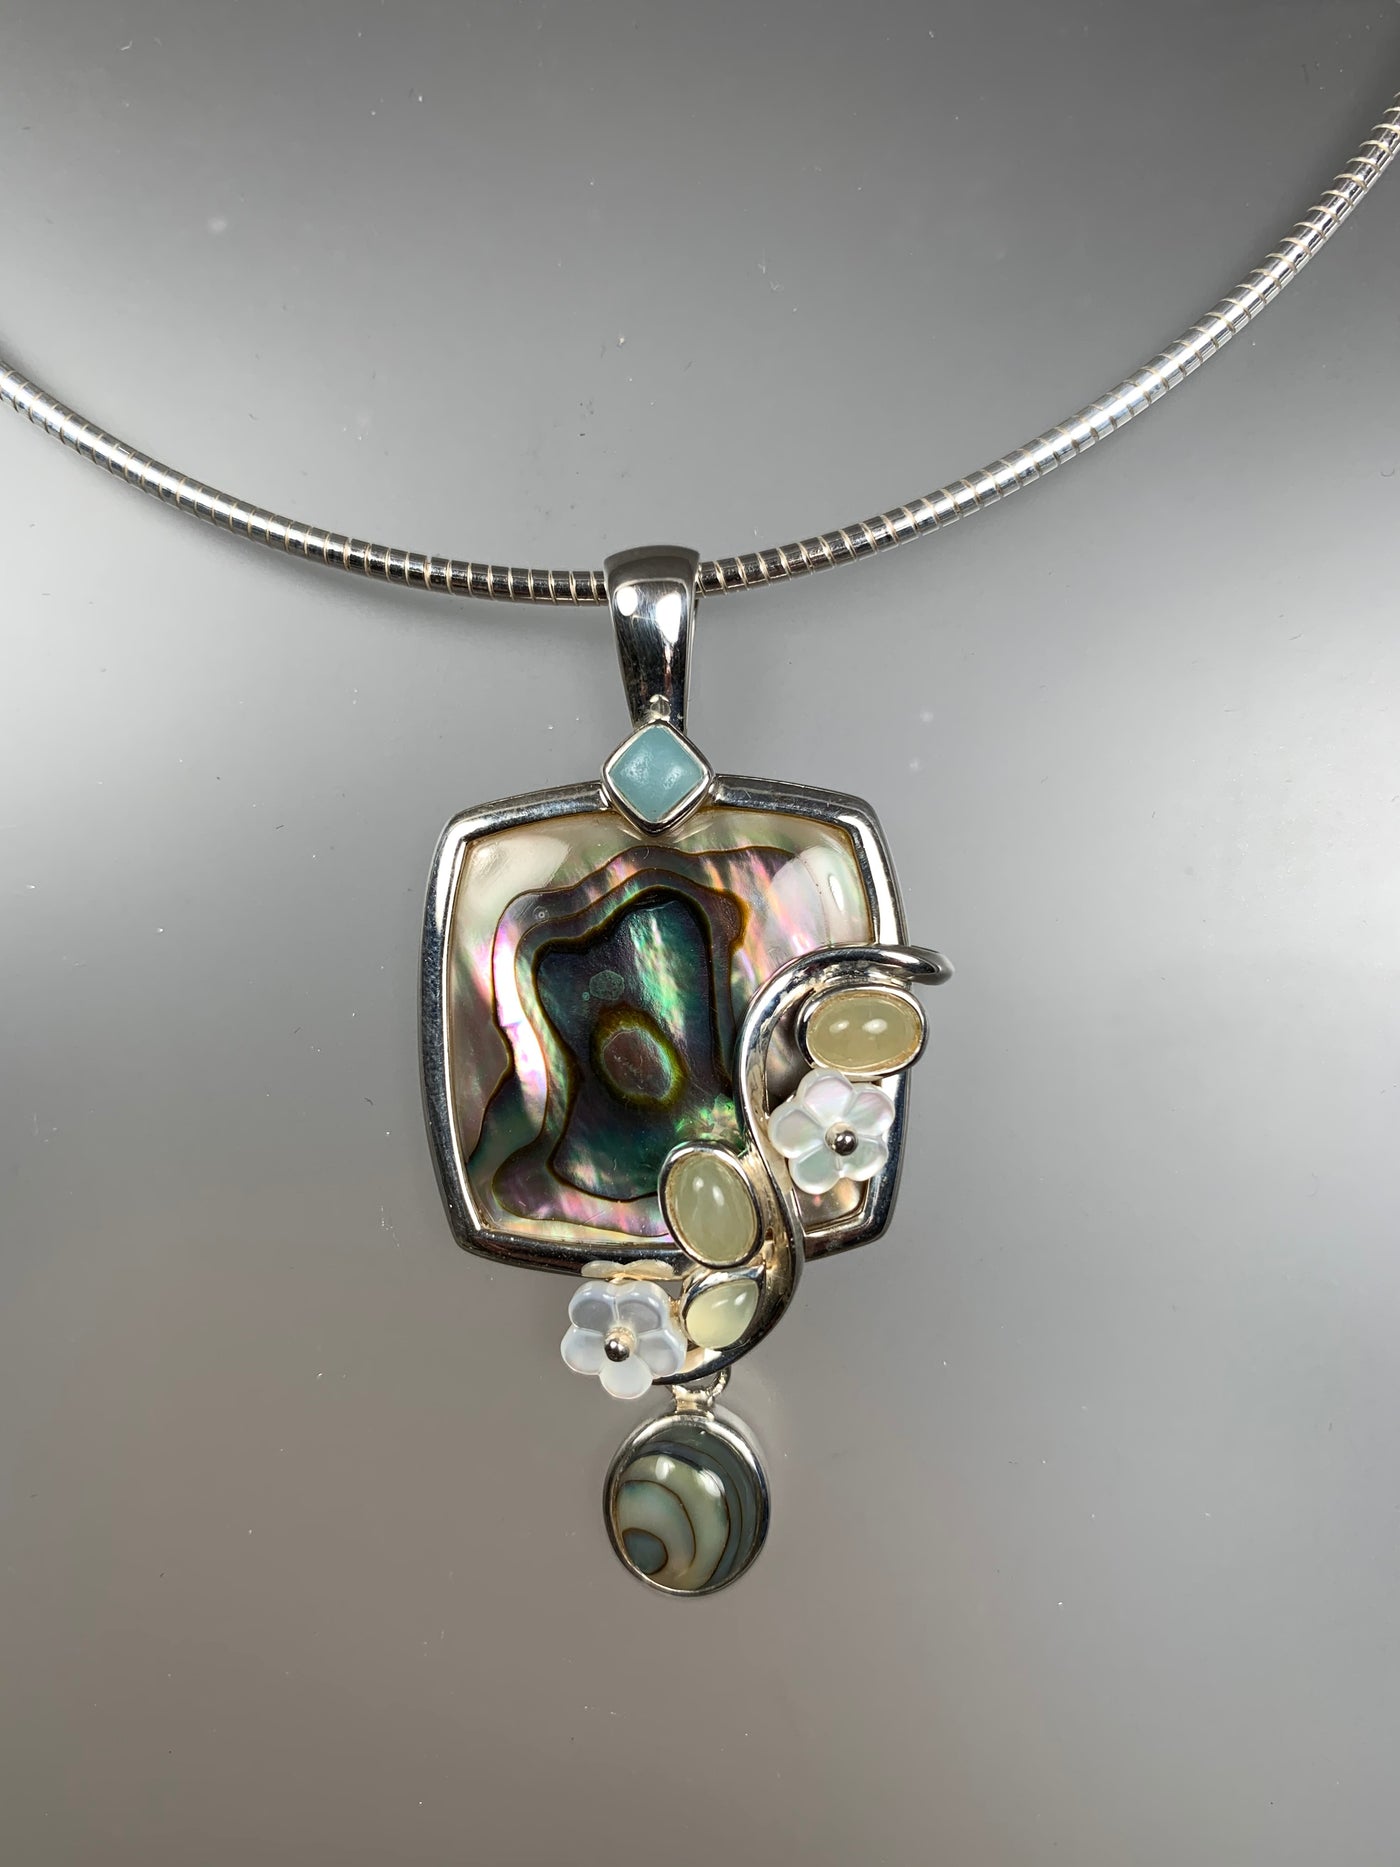 Ornate Natural Abalone Shell and Serpantine Pendant in Sterling Silver